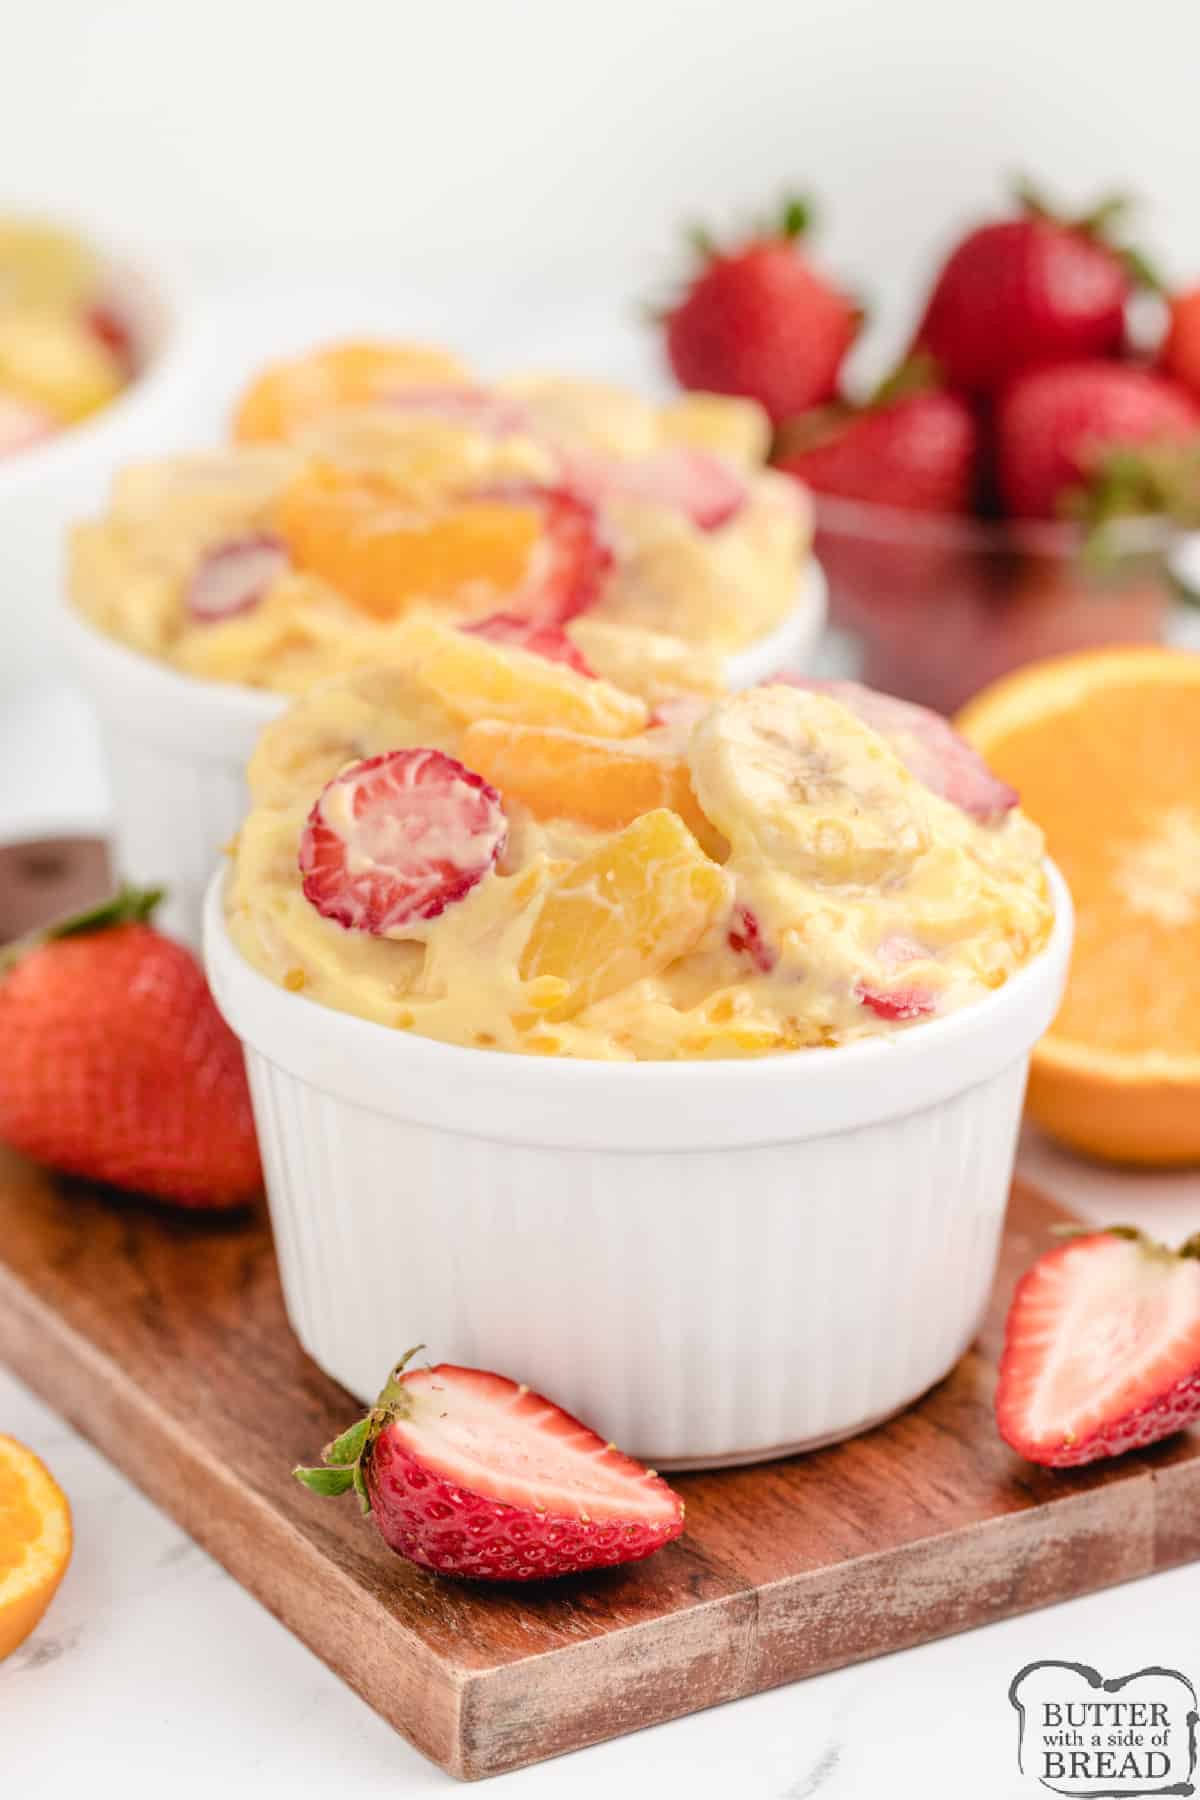 Vanilla Orange Fruit Salad is a simple fruit salad that makes the perfect side dish for any meal! This delicious fruit salad recipe is full of pineapple, oranges, strawberries and bananas coated with a vanilla pudding and yogurt glaze.